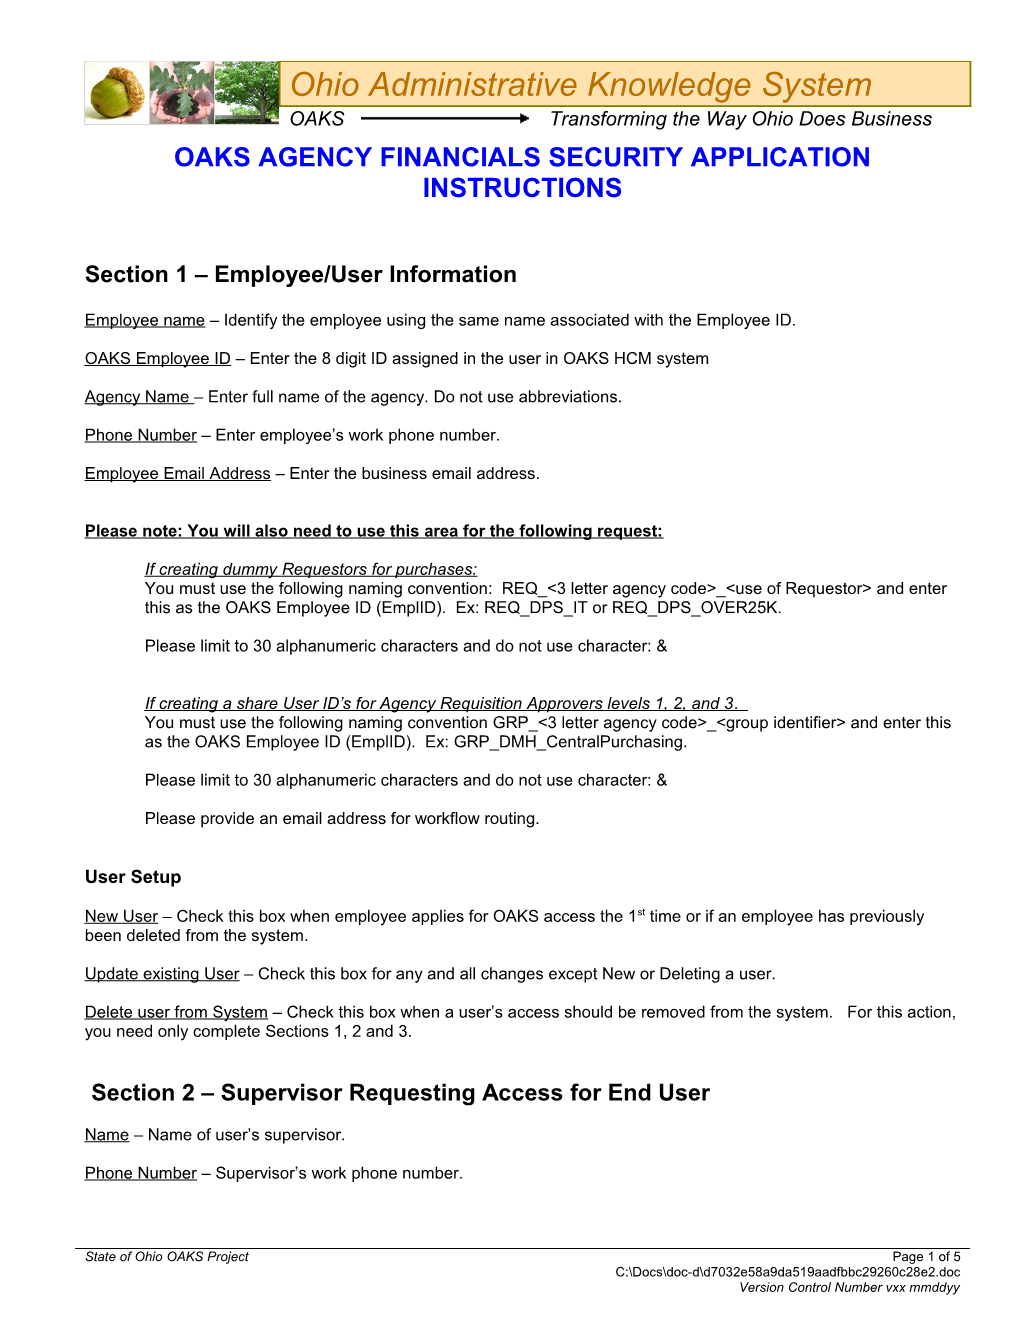 Oaks Agency Financials Security Application Instructions